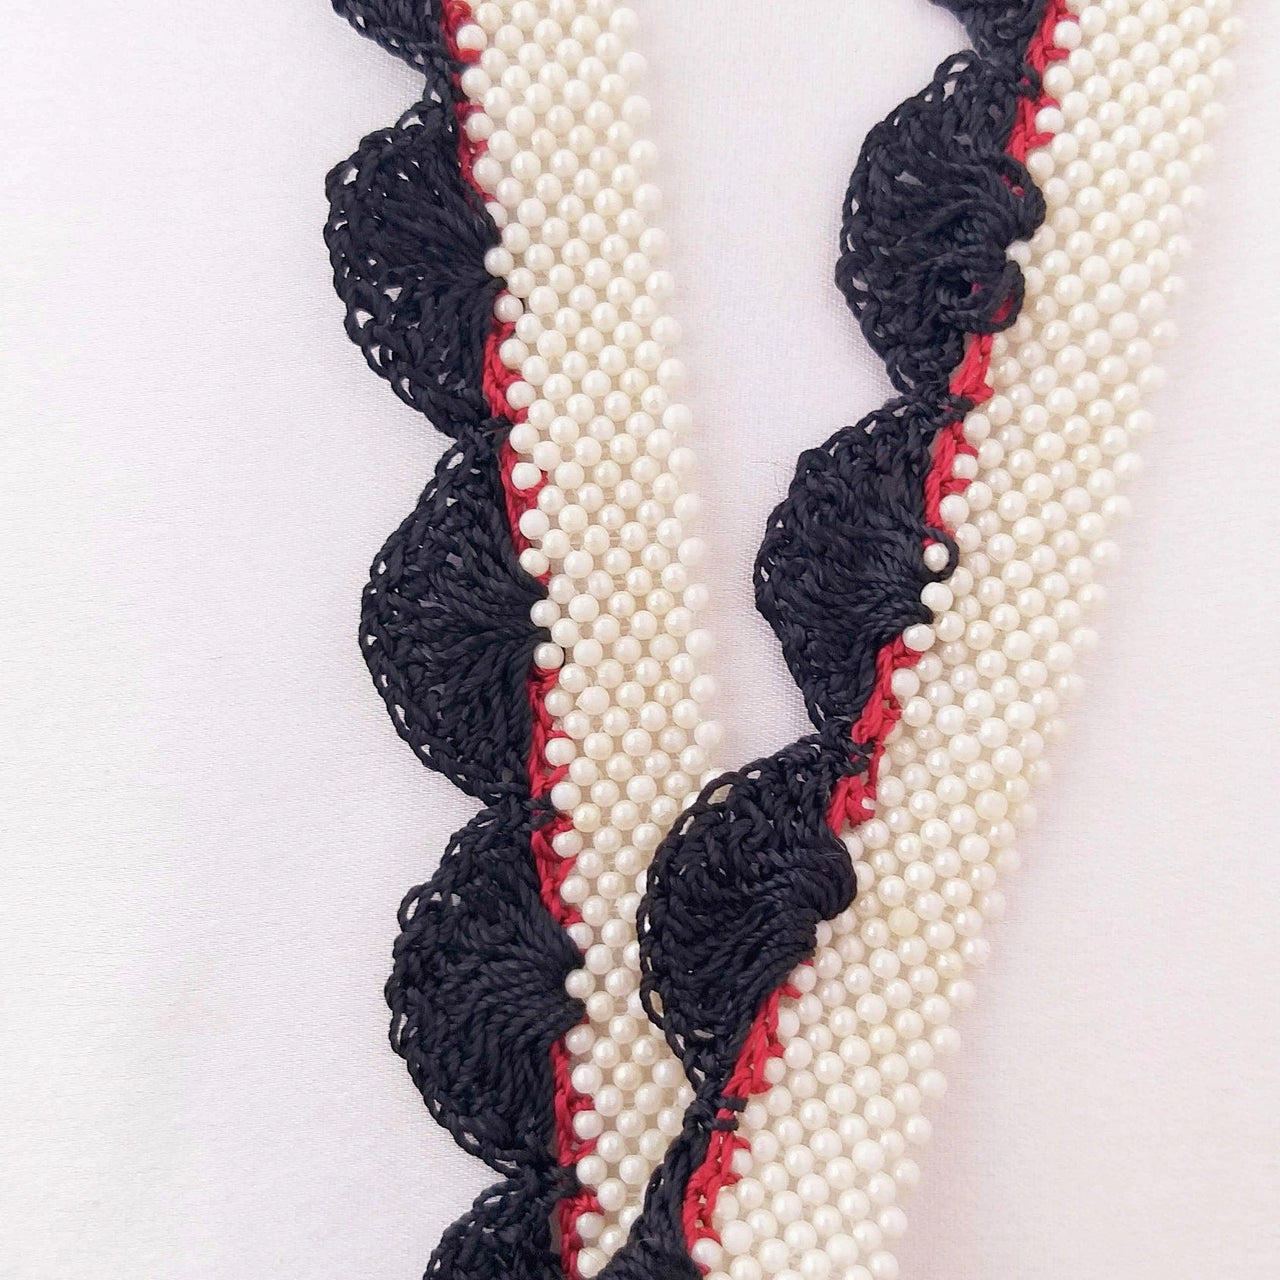 Fuchsia Pink / Black Crochet Trim With Off White Pearls, Scallop Trimming, Approx. 30mm wide